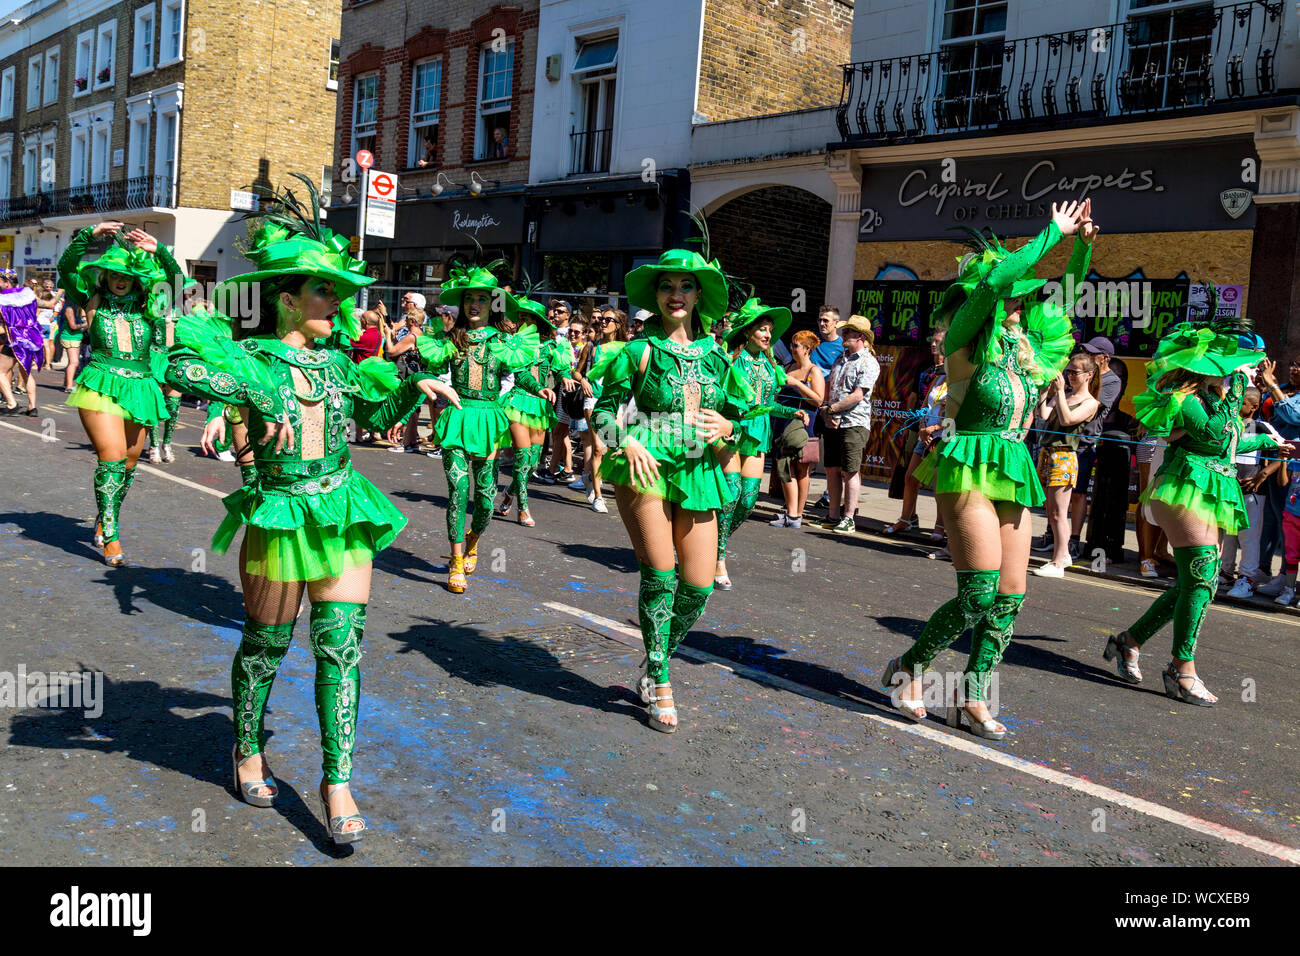 26 August 2019 - Women dressed up in green costumes dancing in the parade, Notting Hill Carnival on a hot Bank Holiday Monday, London, UK Stock Photo